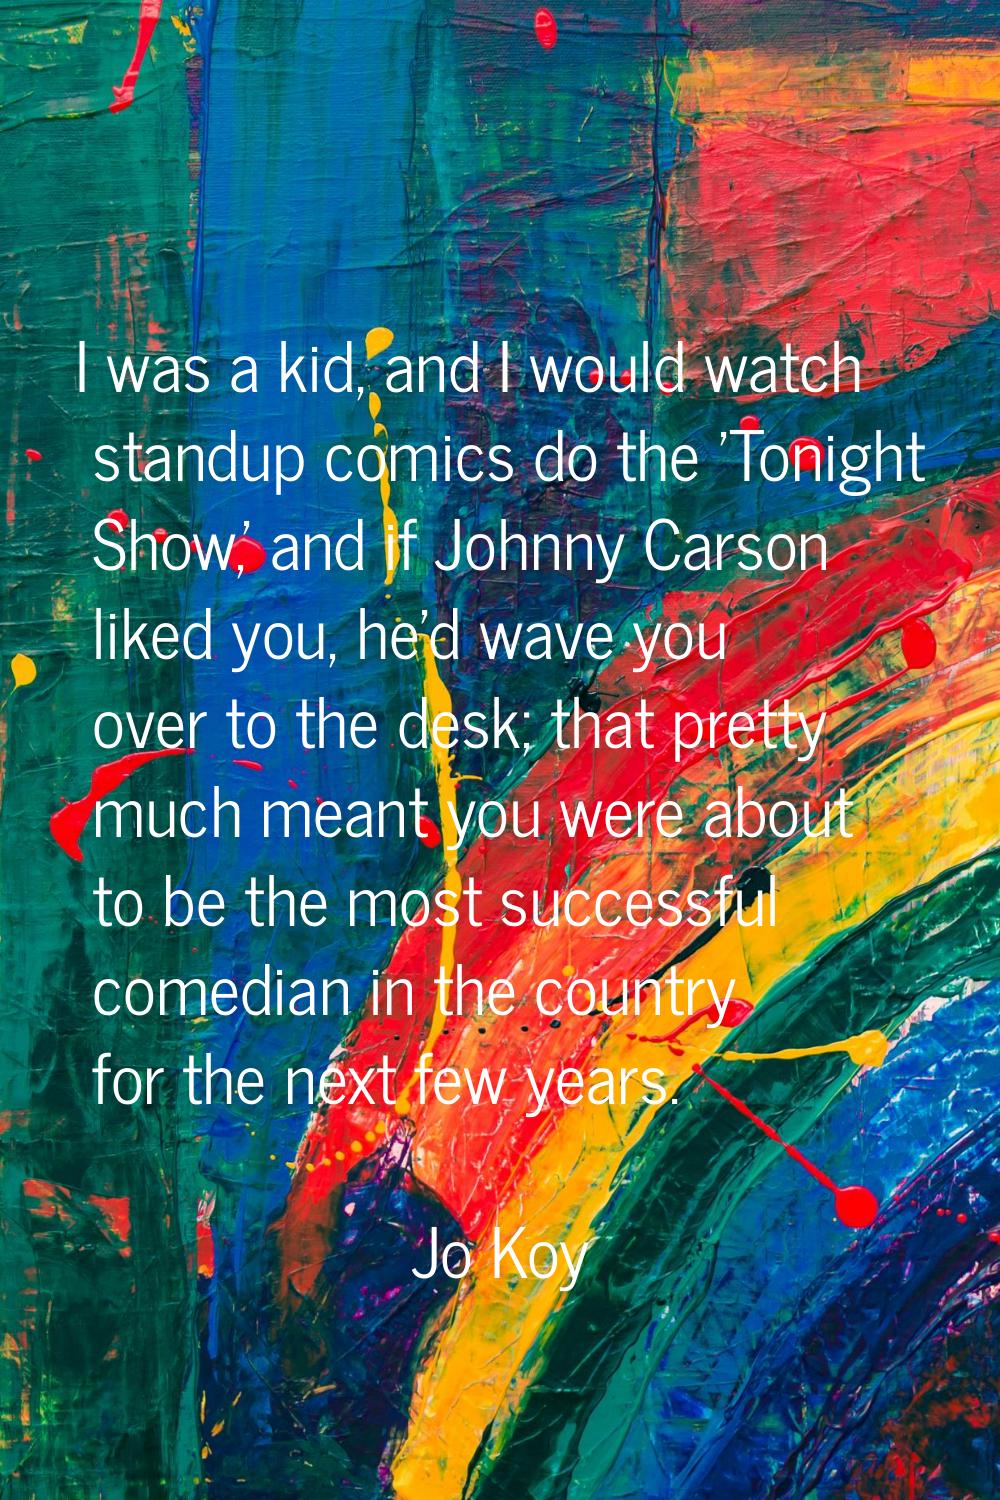 I was a kid, and I would watch standup comics do the 'Tonight Show,' and if Johnny Carson liked you